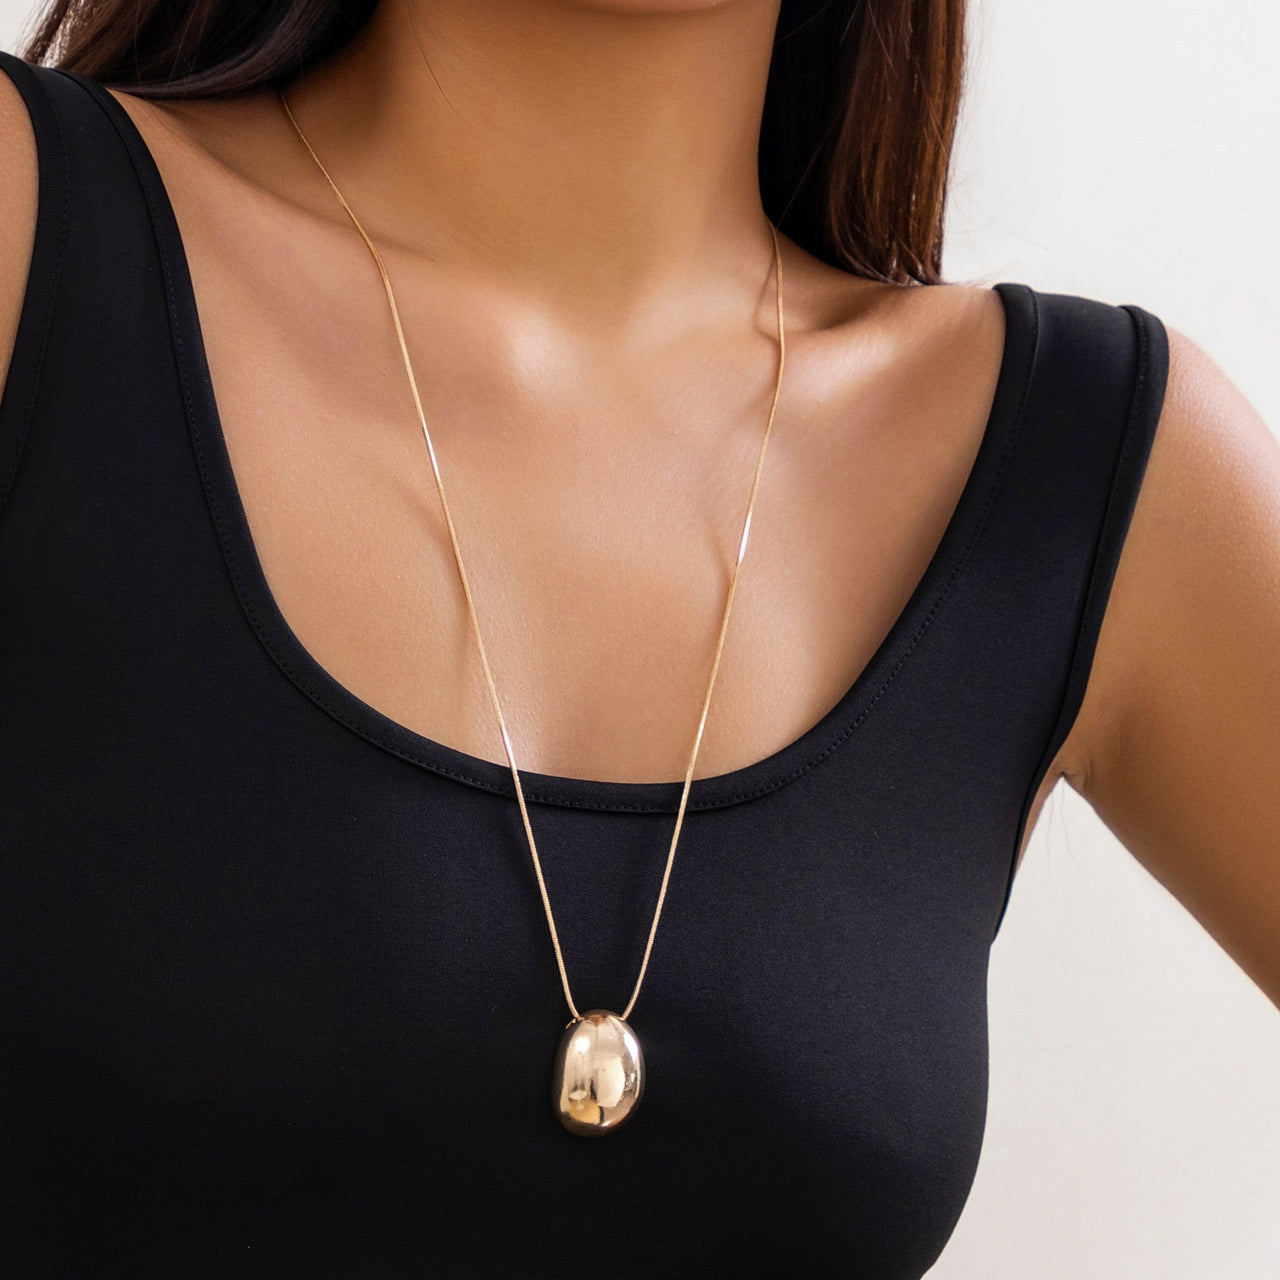 Chic Gold Silver Plated Oval Pendant Necklace - ArtGalleryZen